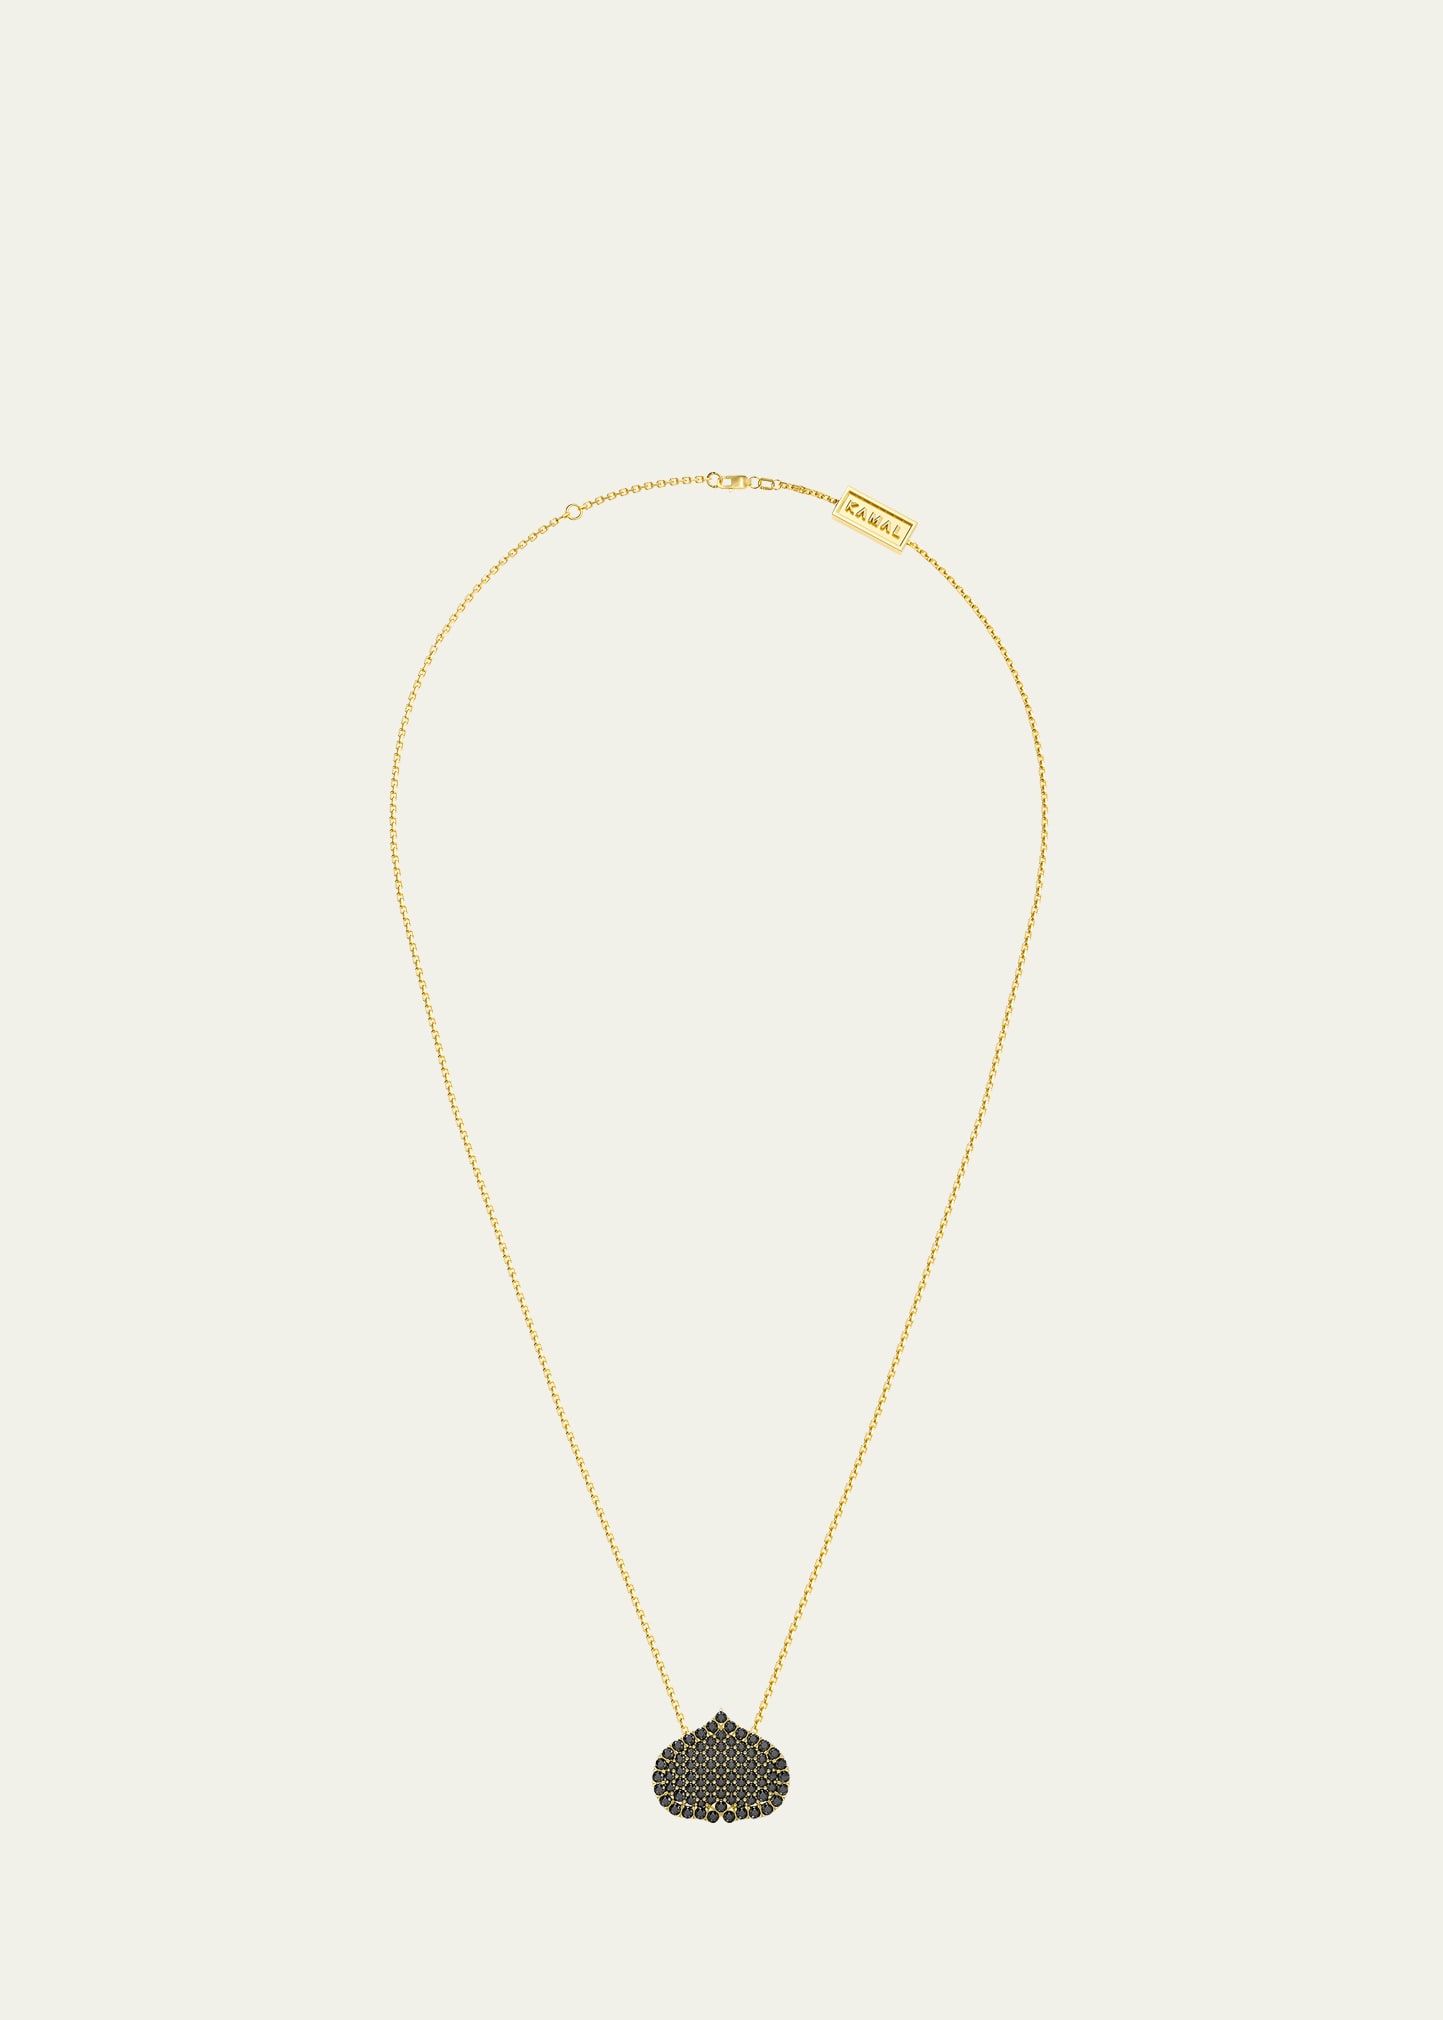 Eye Adore Necklace in Yellow Gold with Black Diamonds, 15mm